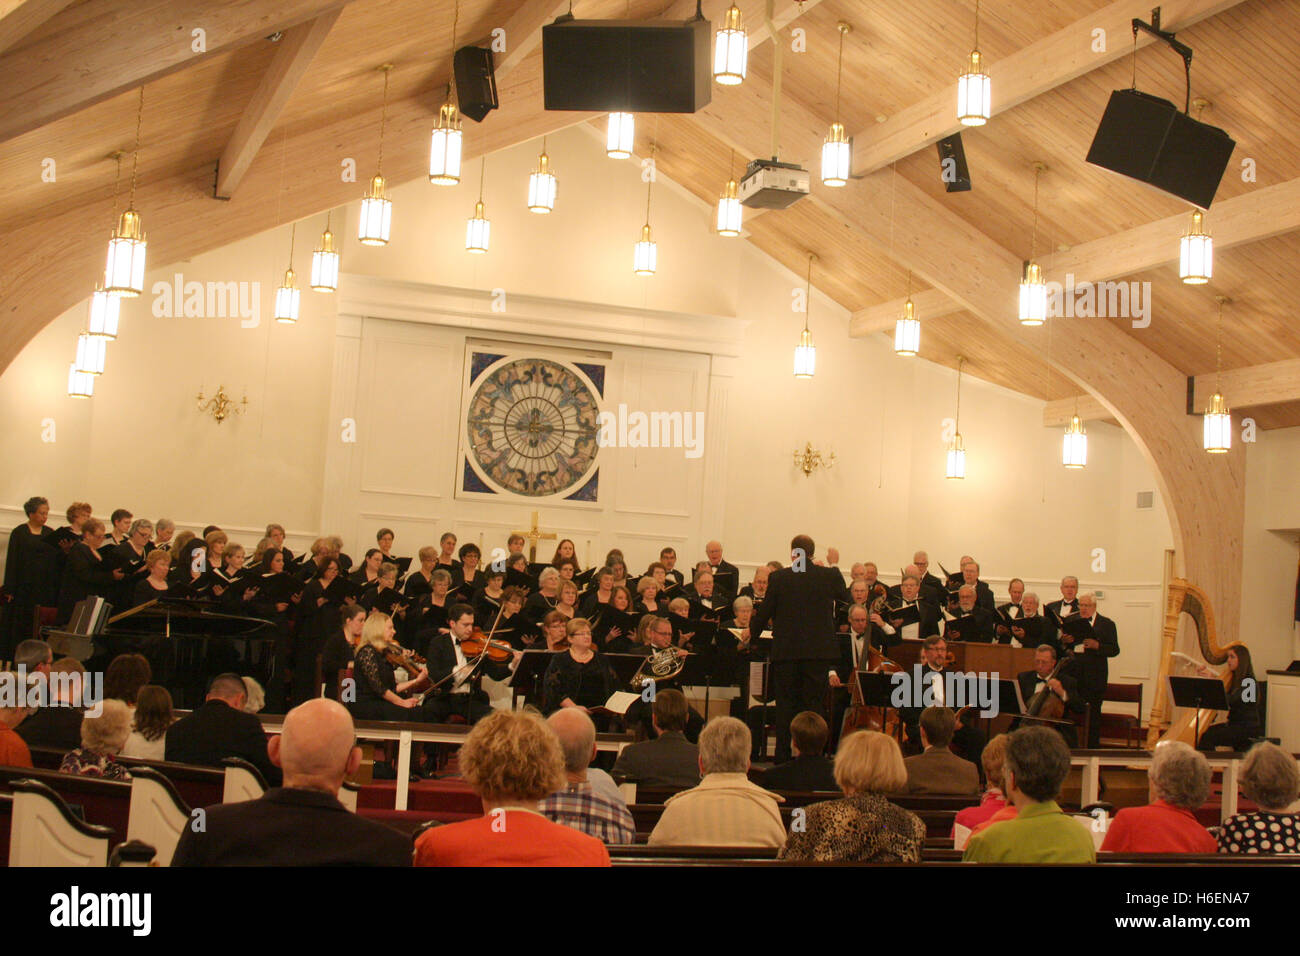 Choir and orchestra having a public performance in church Stock Photo